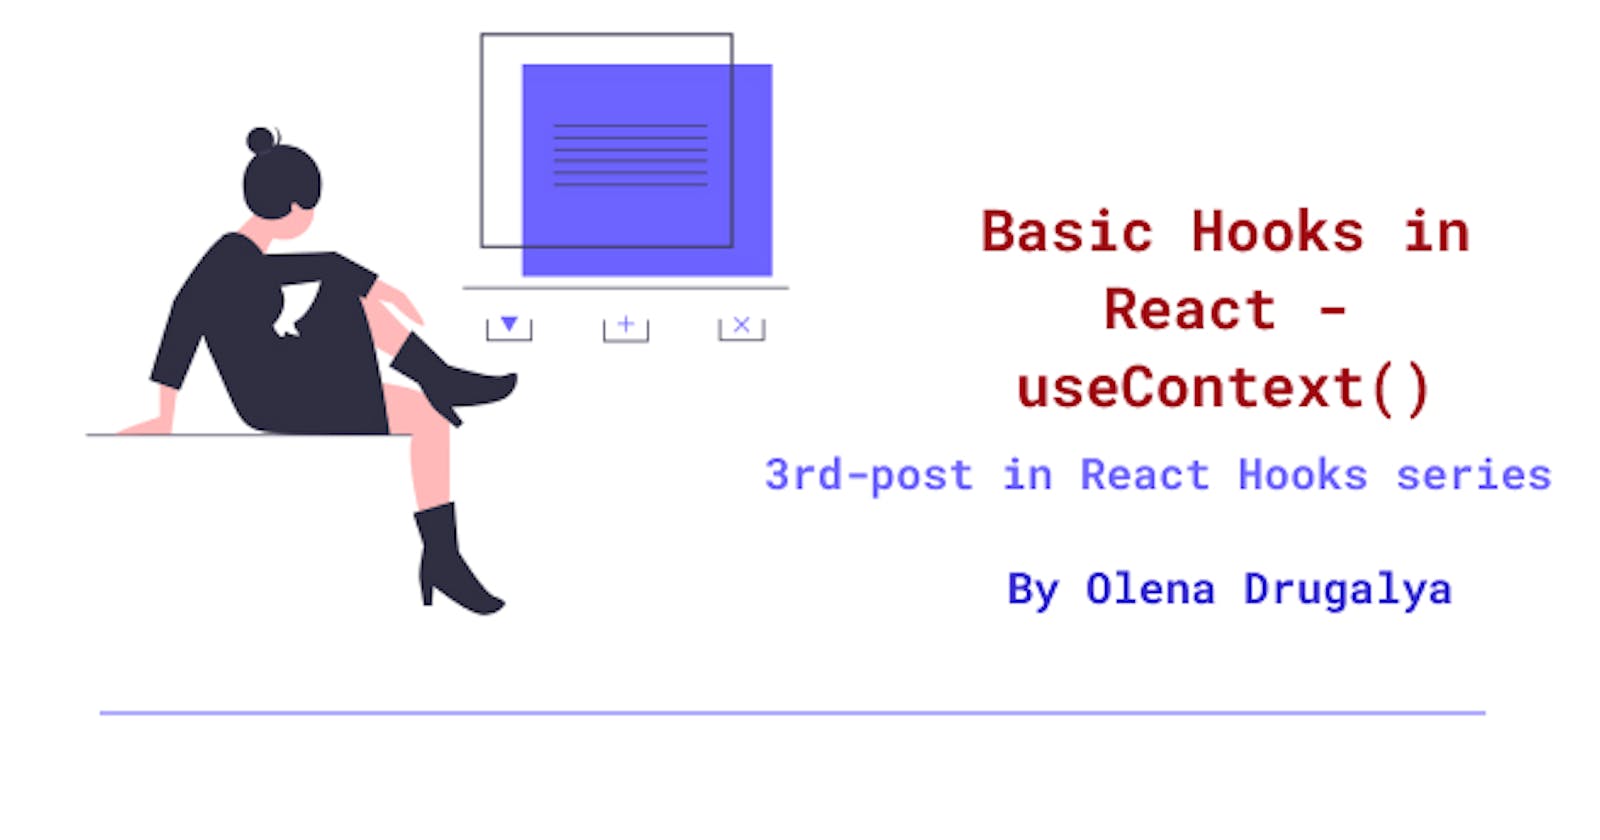 Basic Hooks in React - useContext()